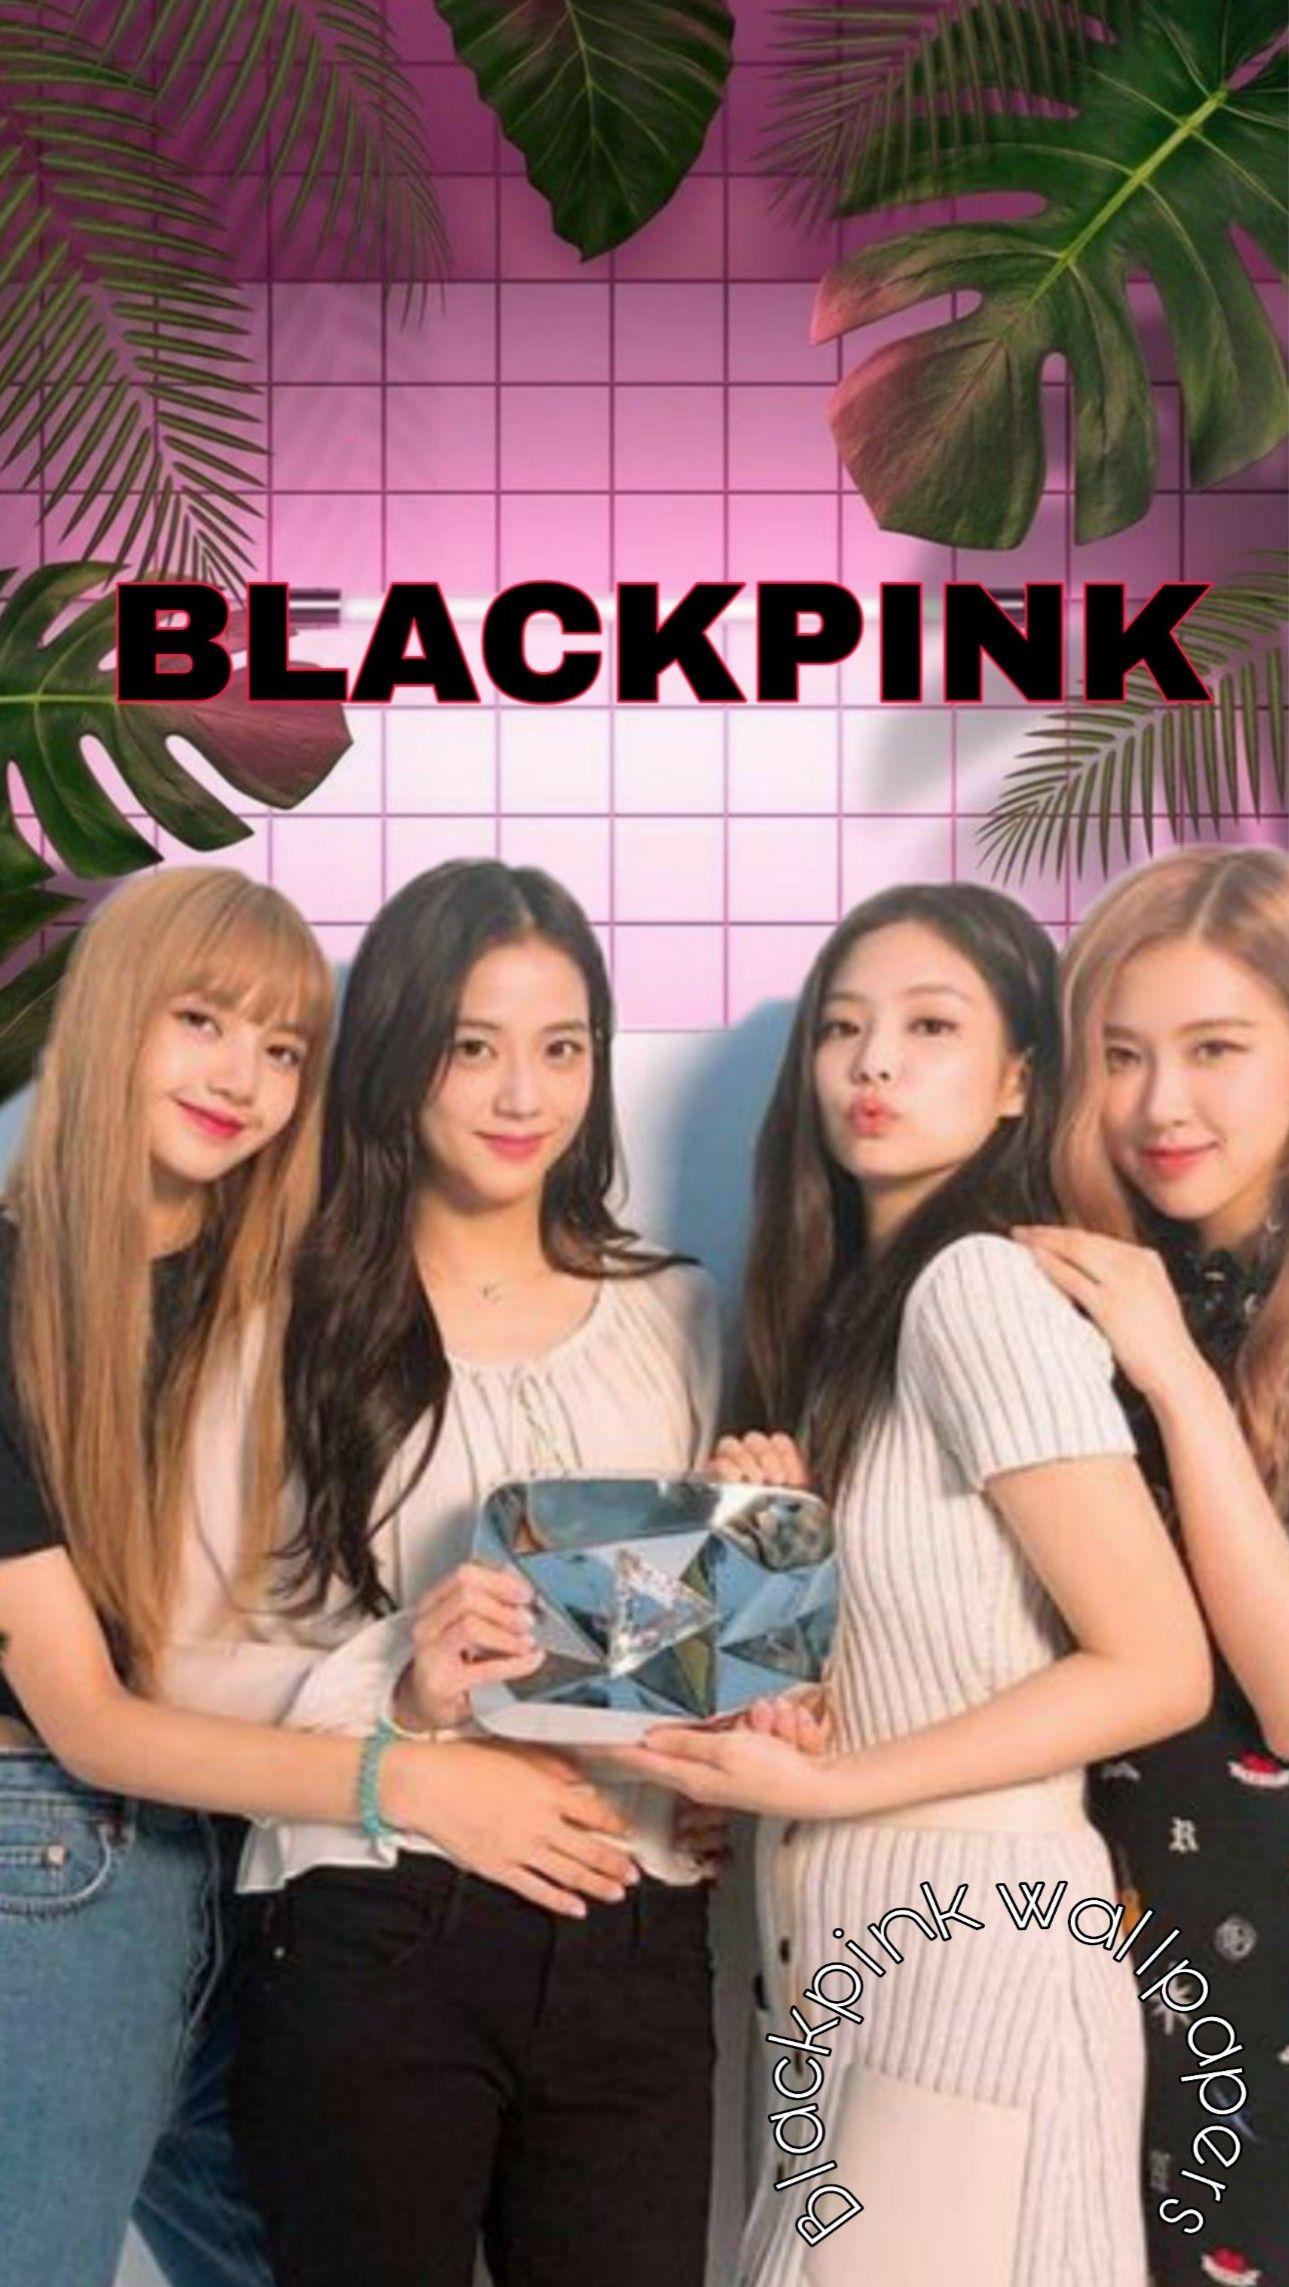 Blackpink Wallpaper for iPhone and android. Classic